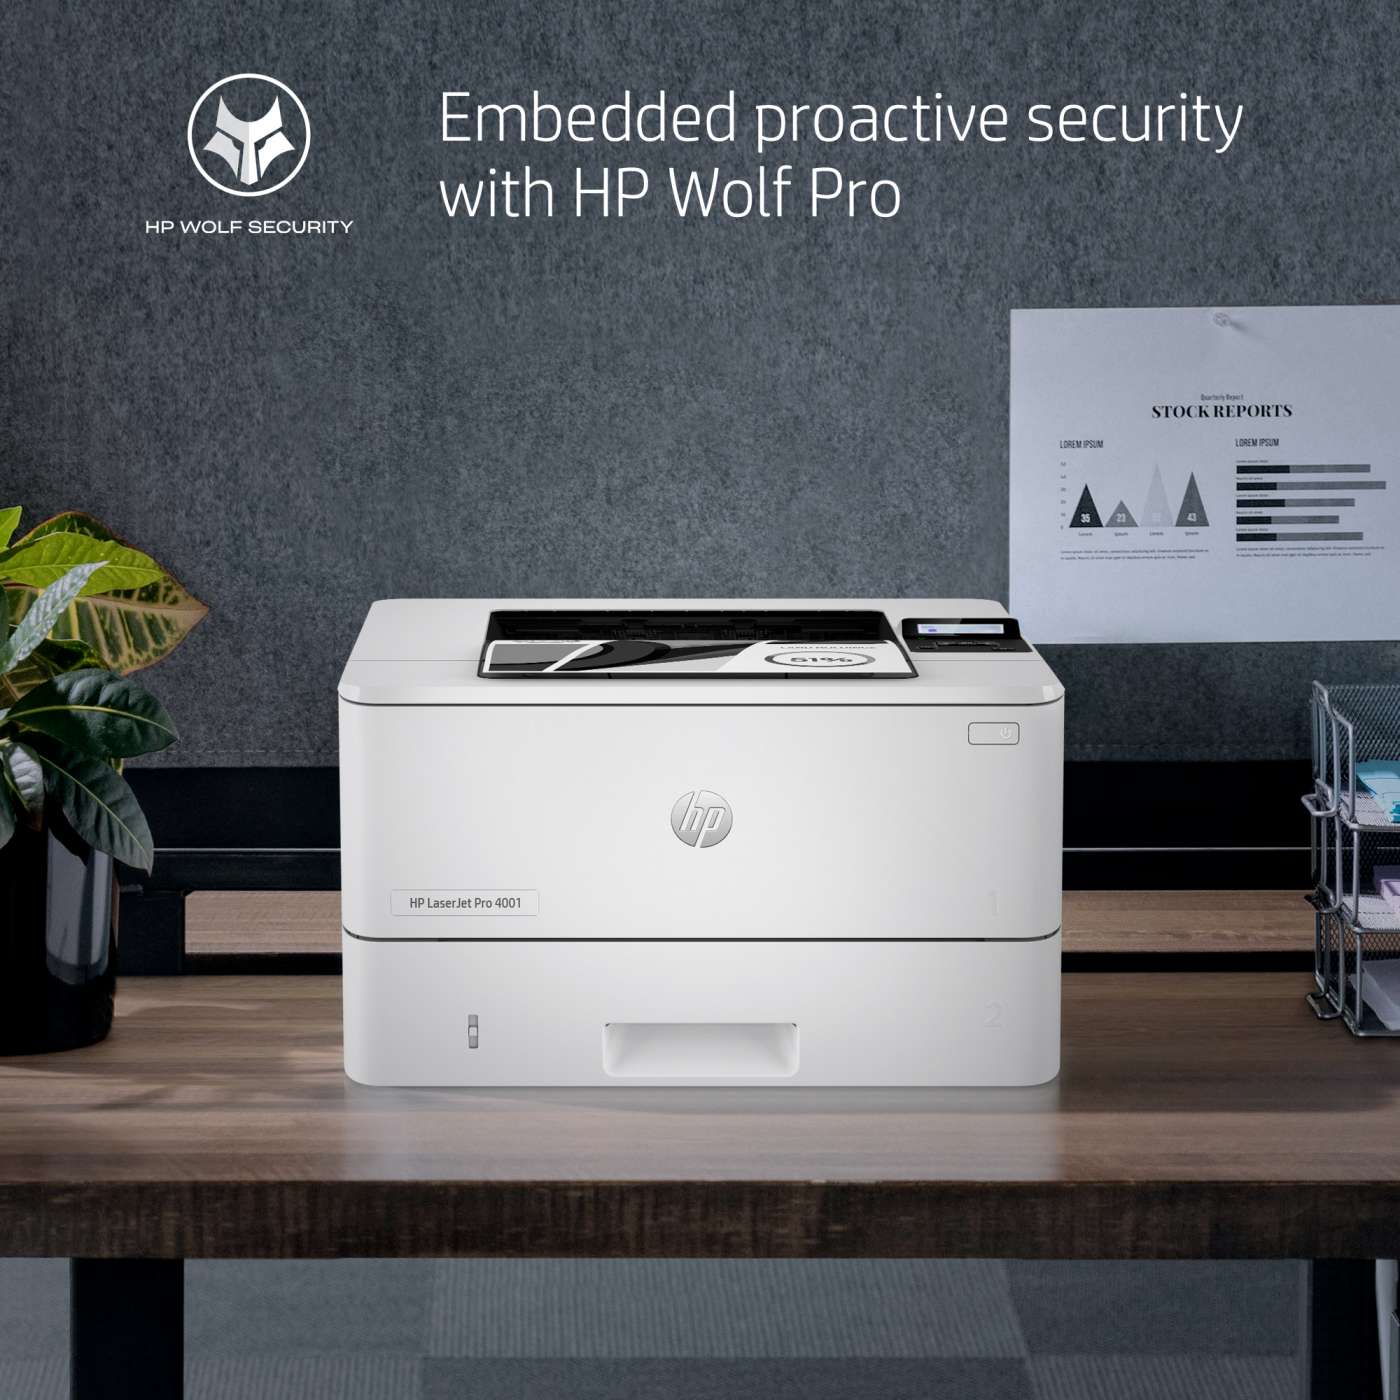 Today’s #hybridworkforce presents a golden opportunity to hackers. Unprotected devices like printers can lead to easy break-ins. RT to hear from one of our @HP Wolf Security experts who can help seal those weak links. @hpsecurity